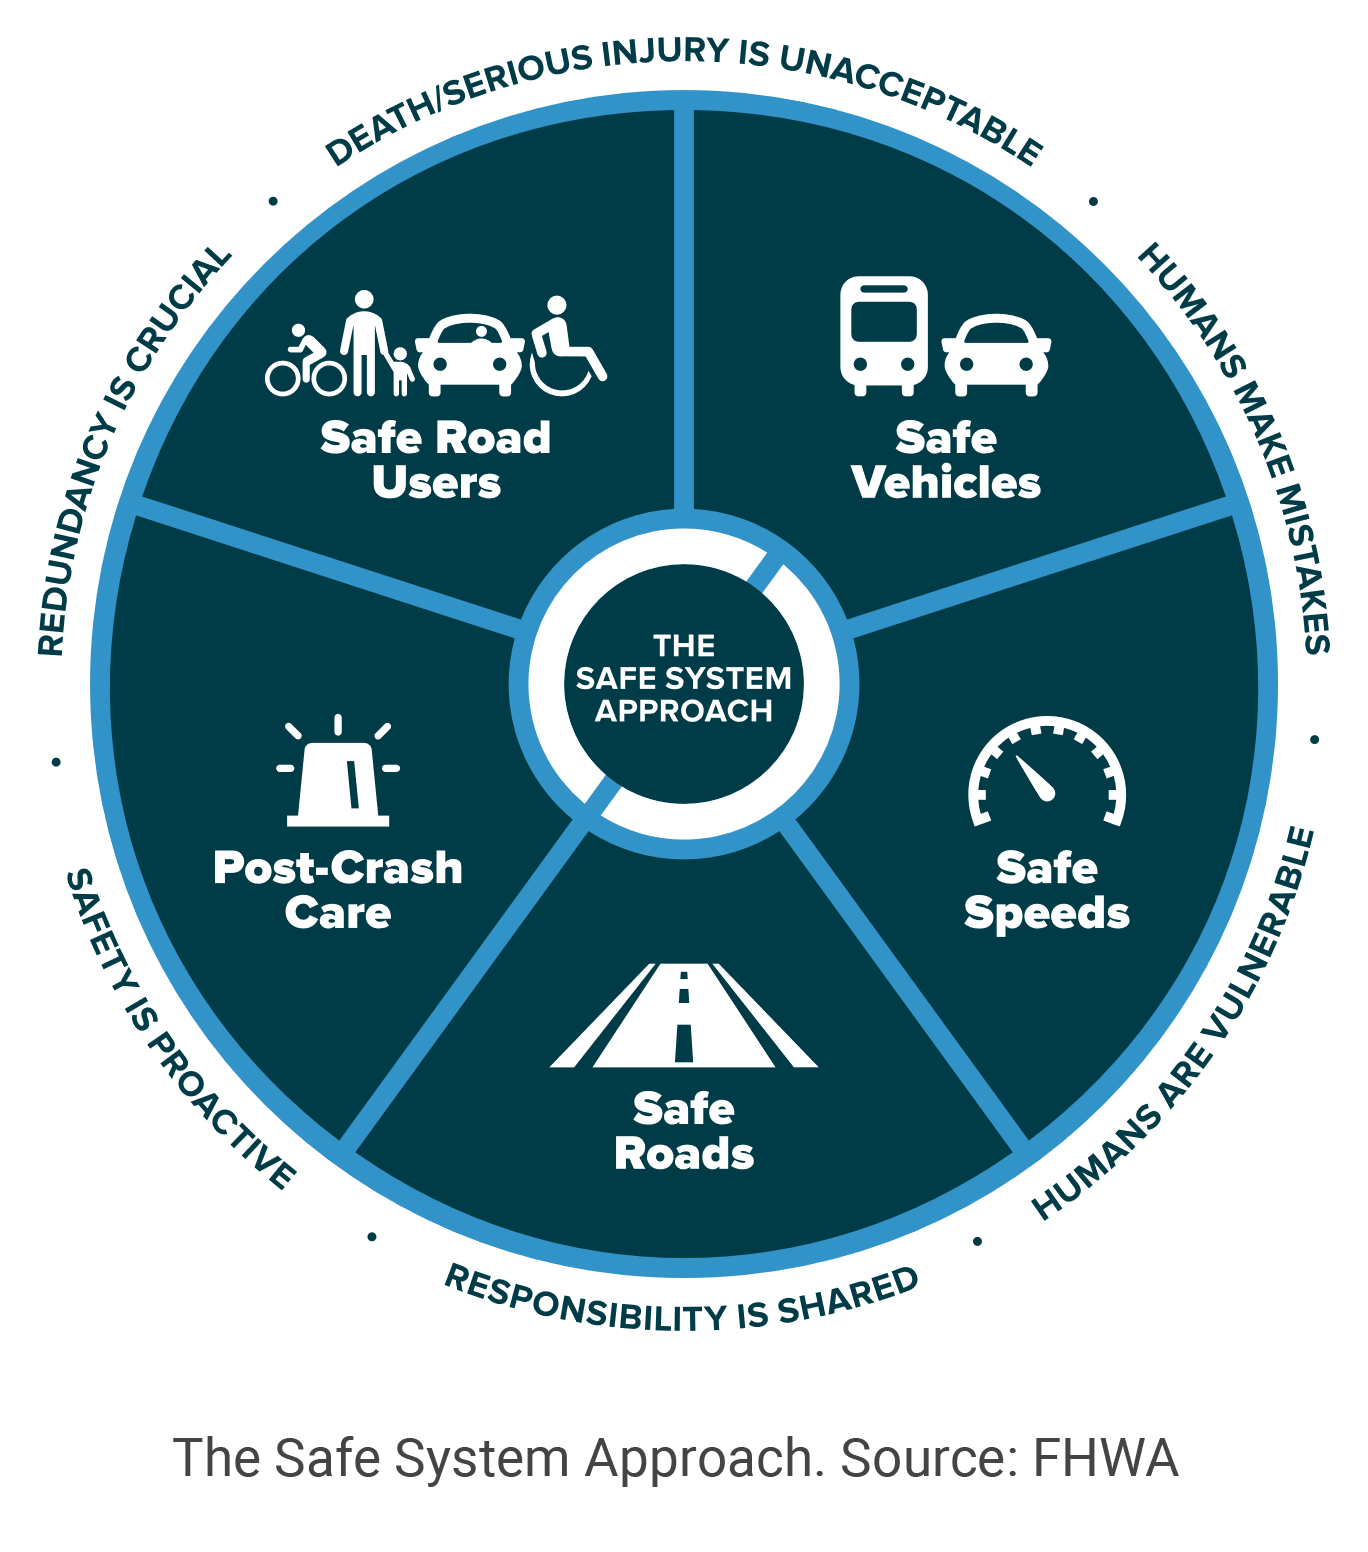 The Safe System Approach. Source: FHWA